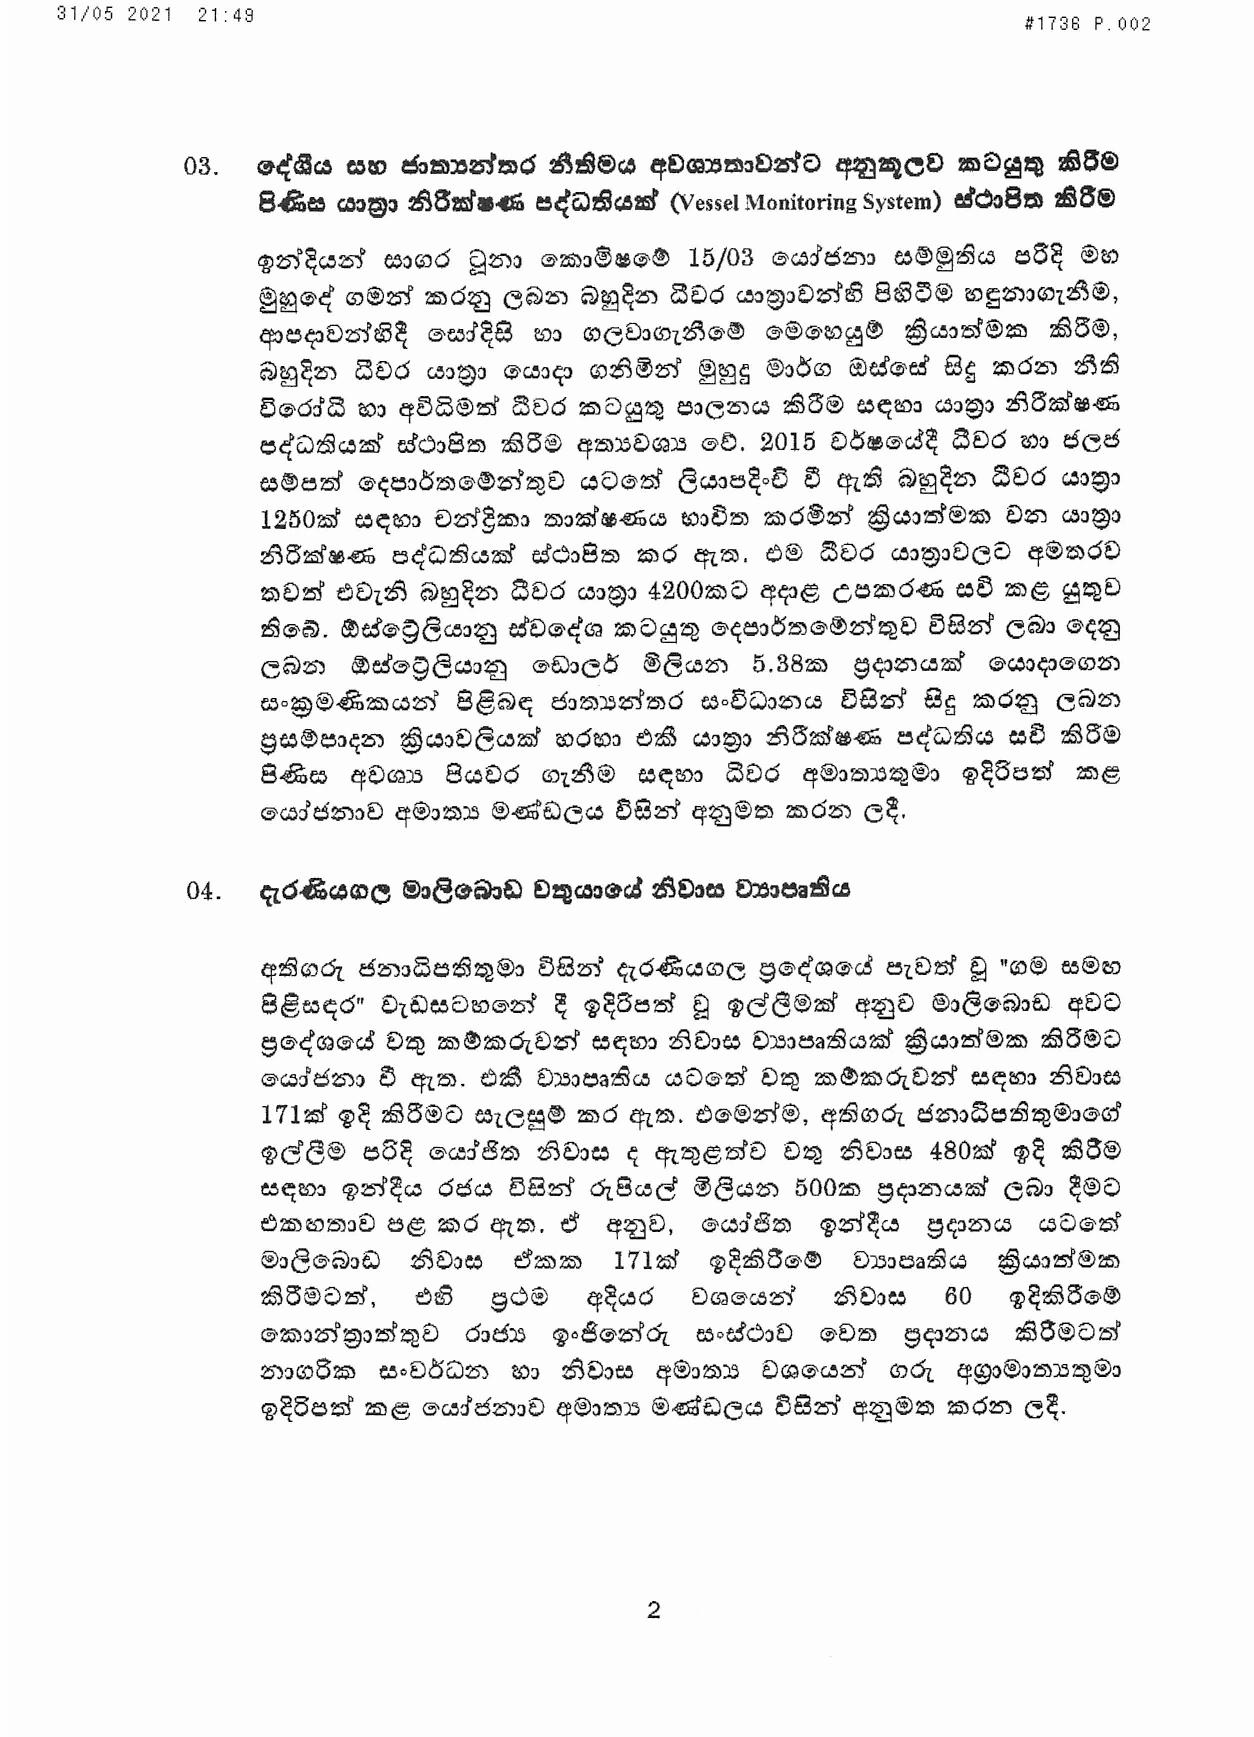 Cabinet Decision on 31.05.2021 page 001